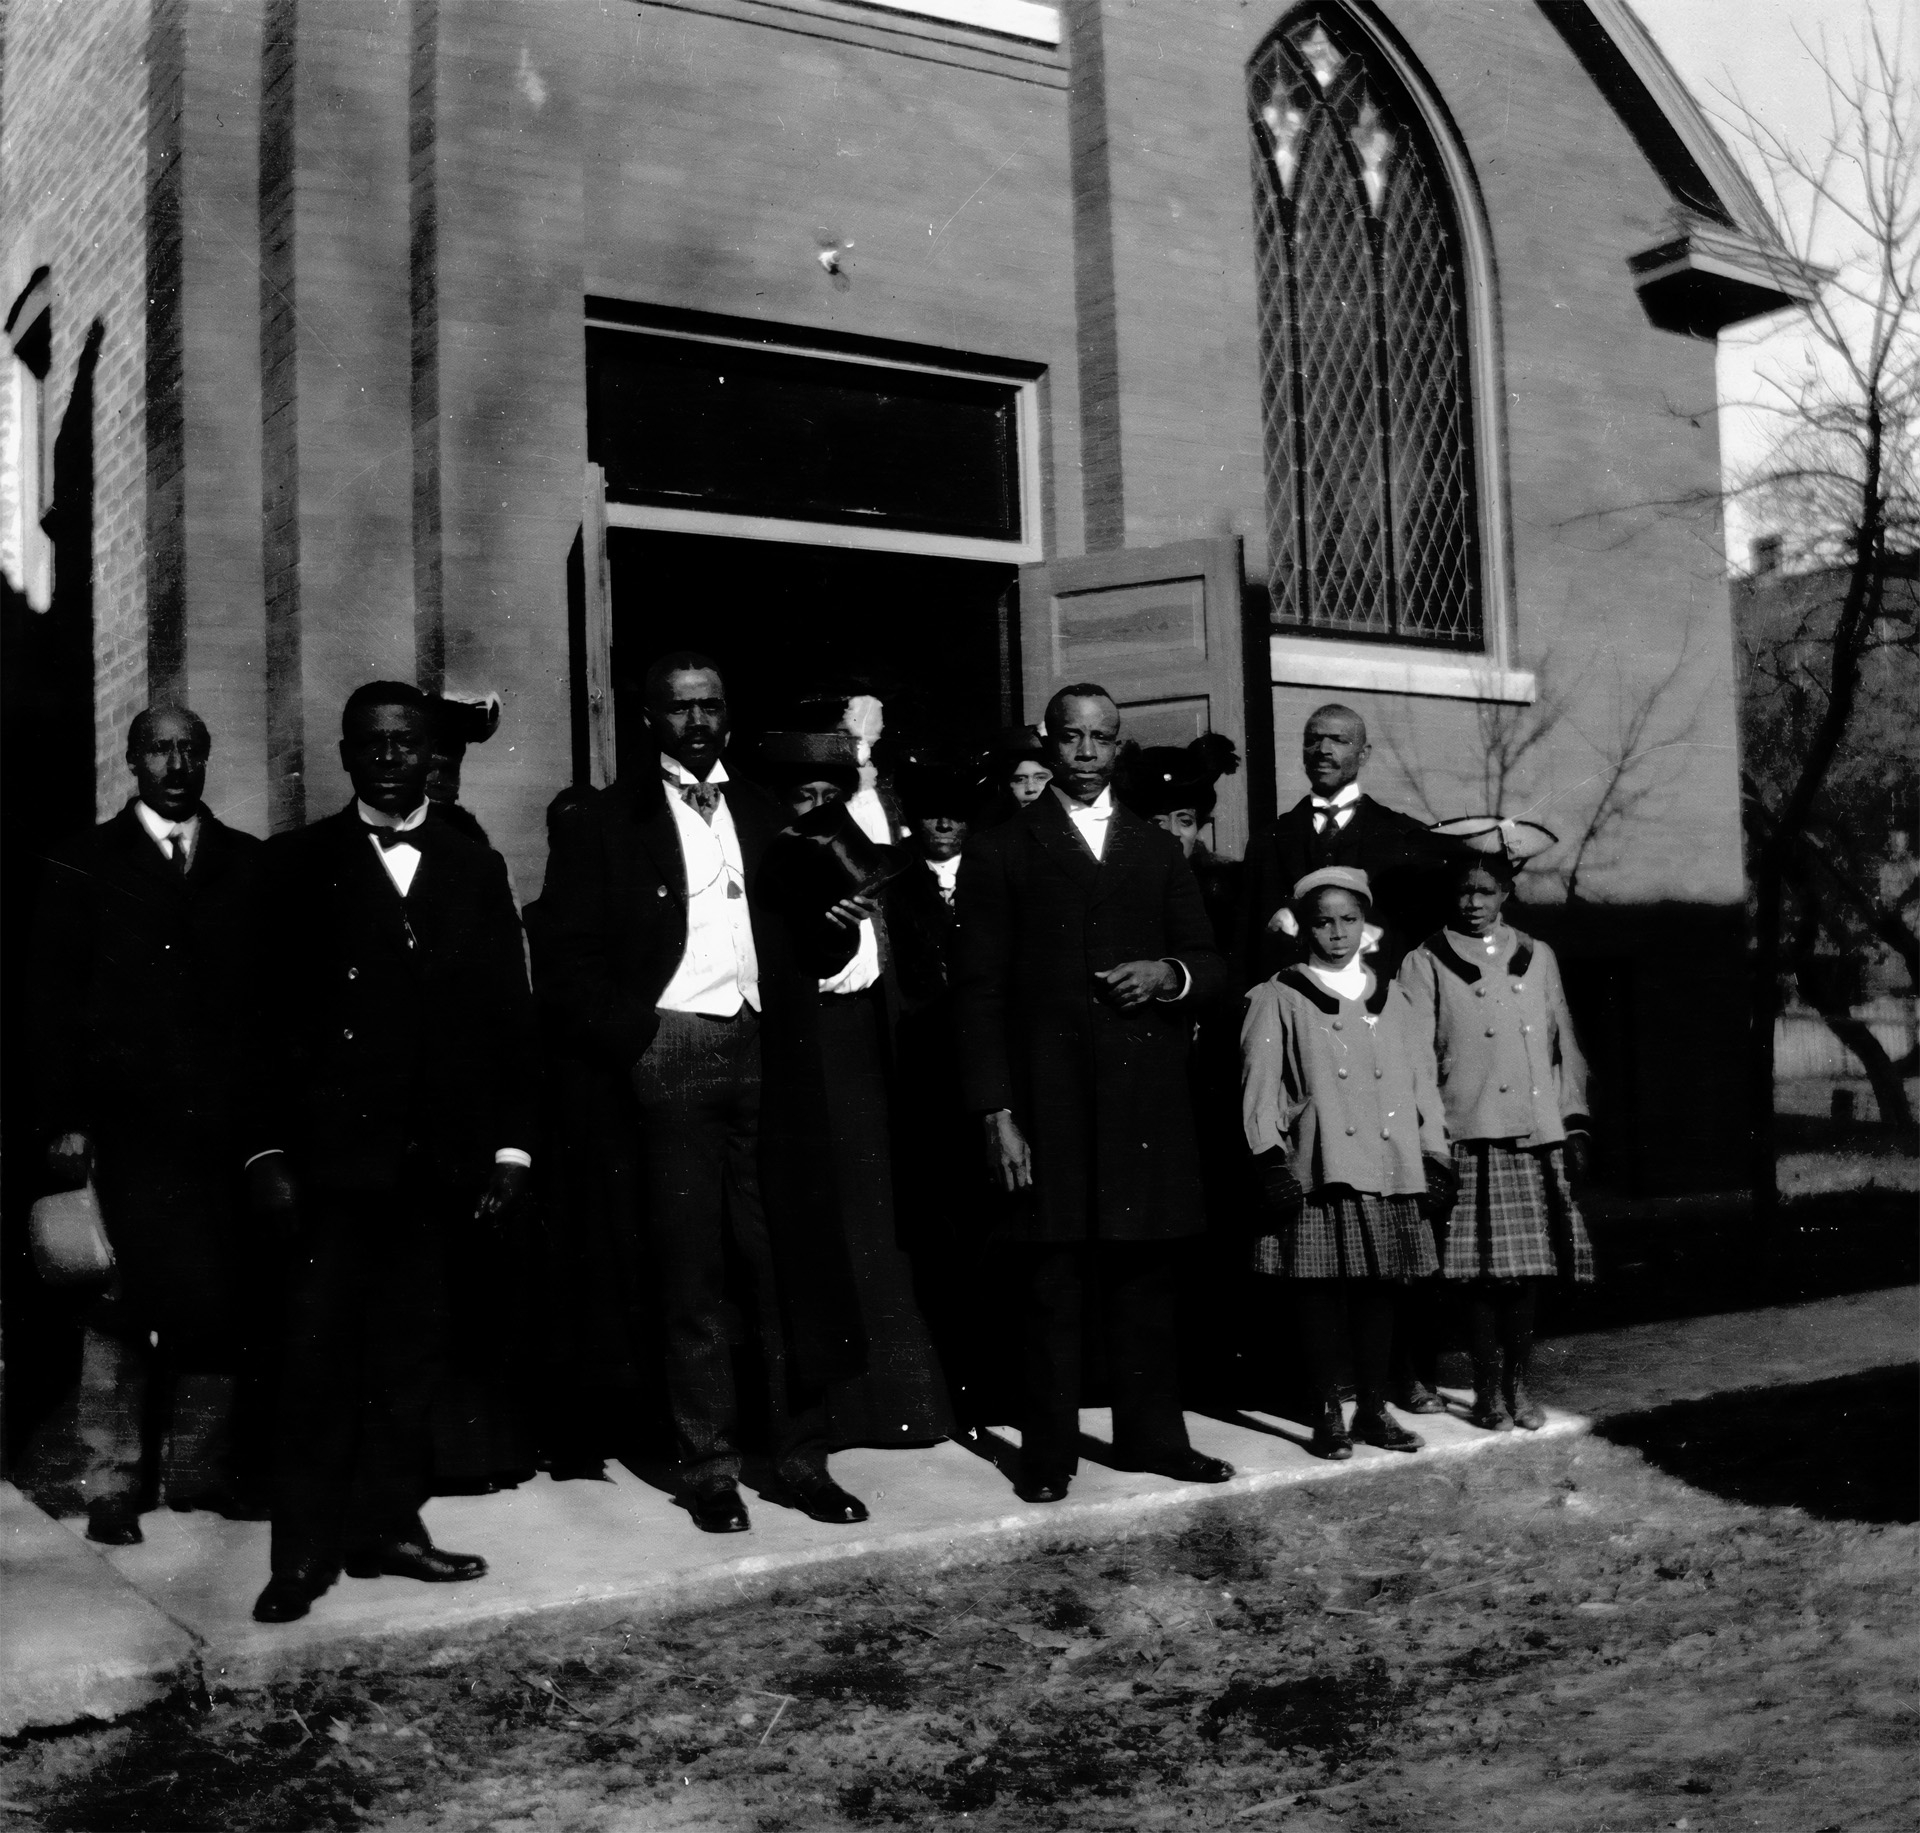 Mt. Carmel Baptist Church opened in 1905. It was located just south of Oak Park’s main business district in the area that had the highest Black population. A few years earlier, White residents had blocked efforts to build the church in northeast Oak Park in an area of new middle-class homes.